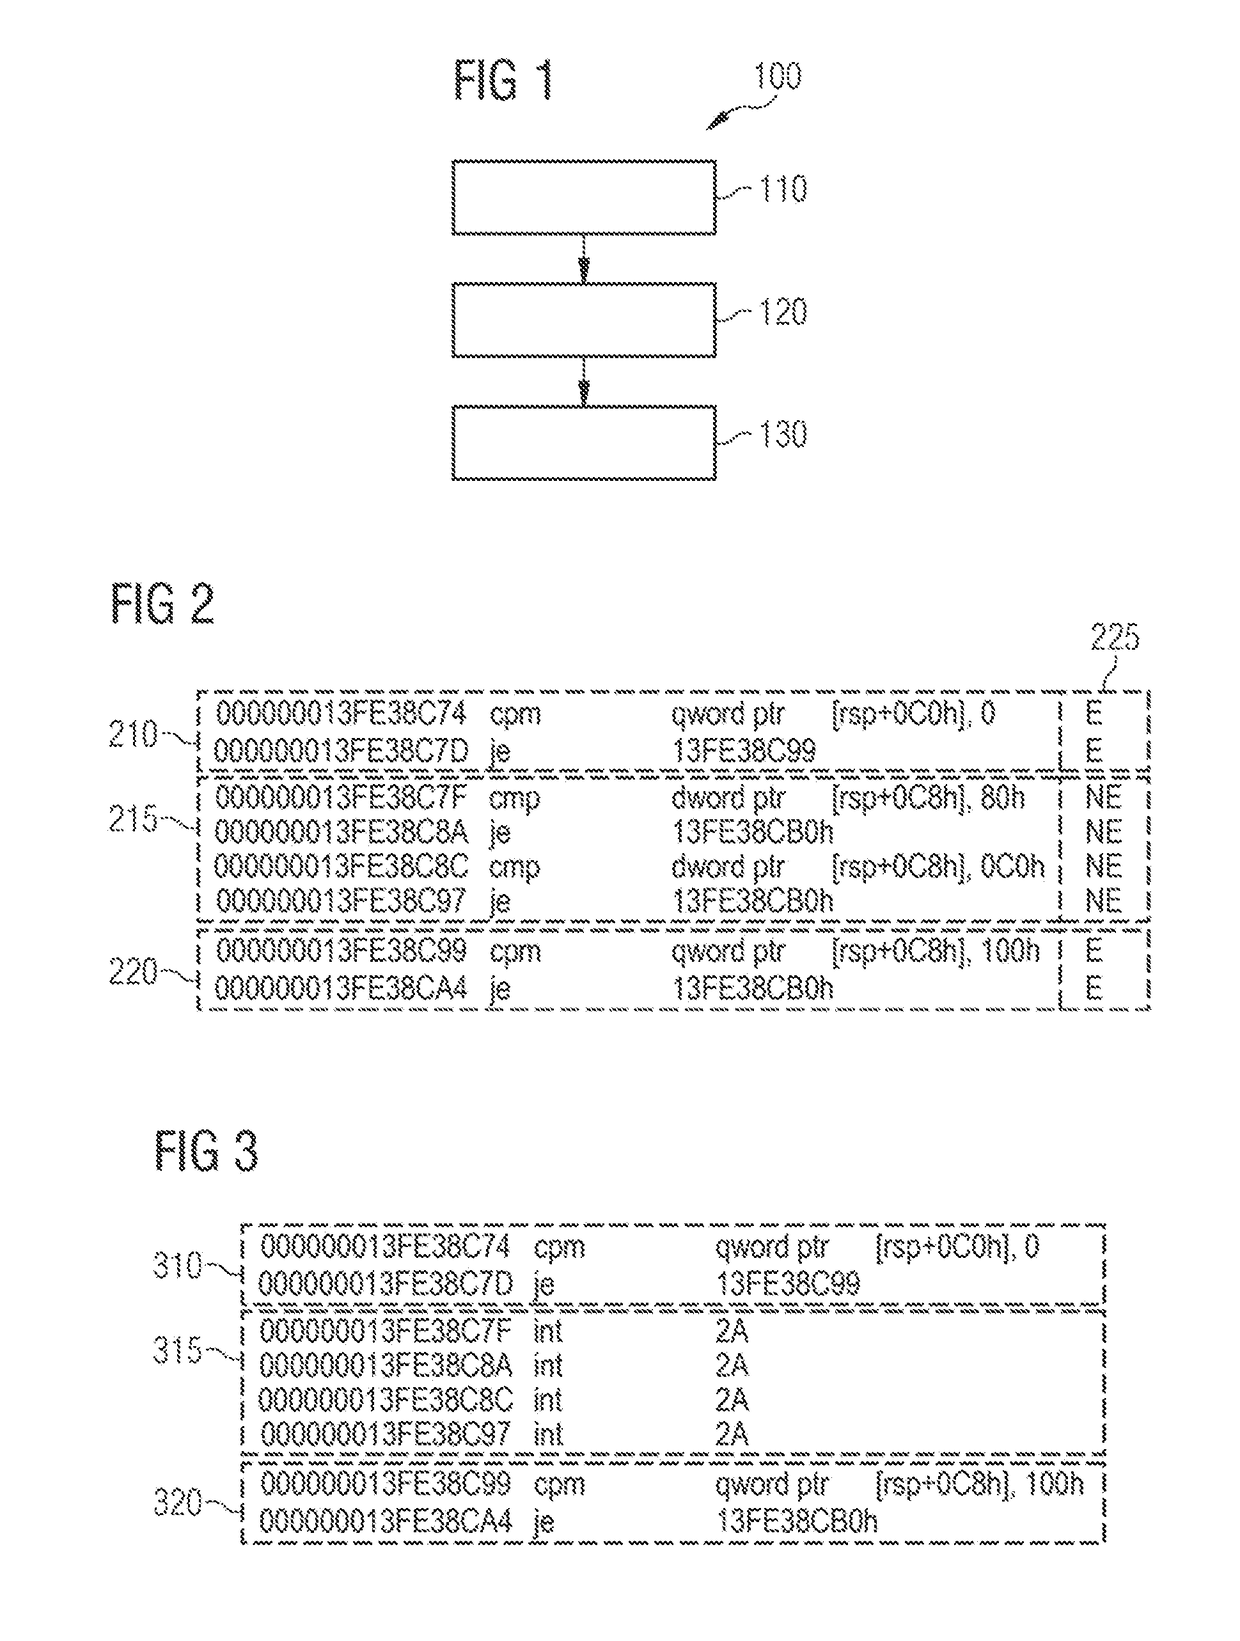 Method and execution environment for the secure execution of program instructions